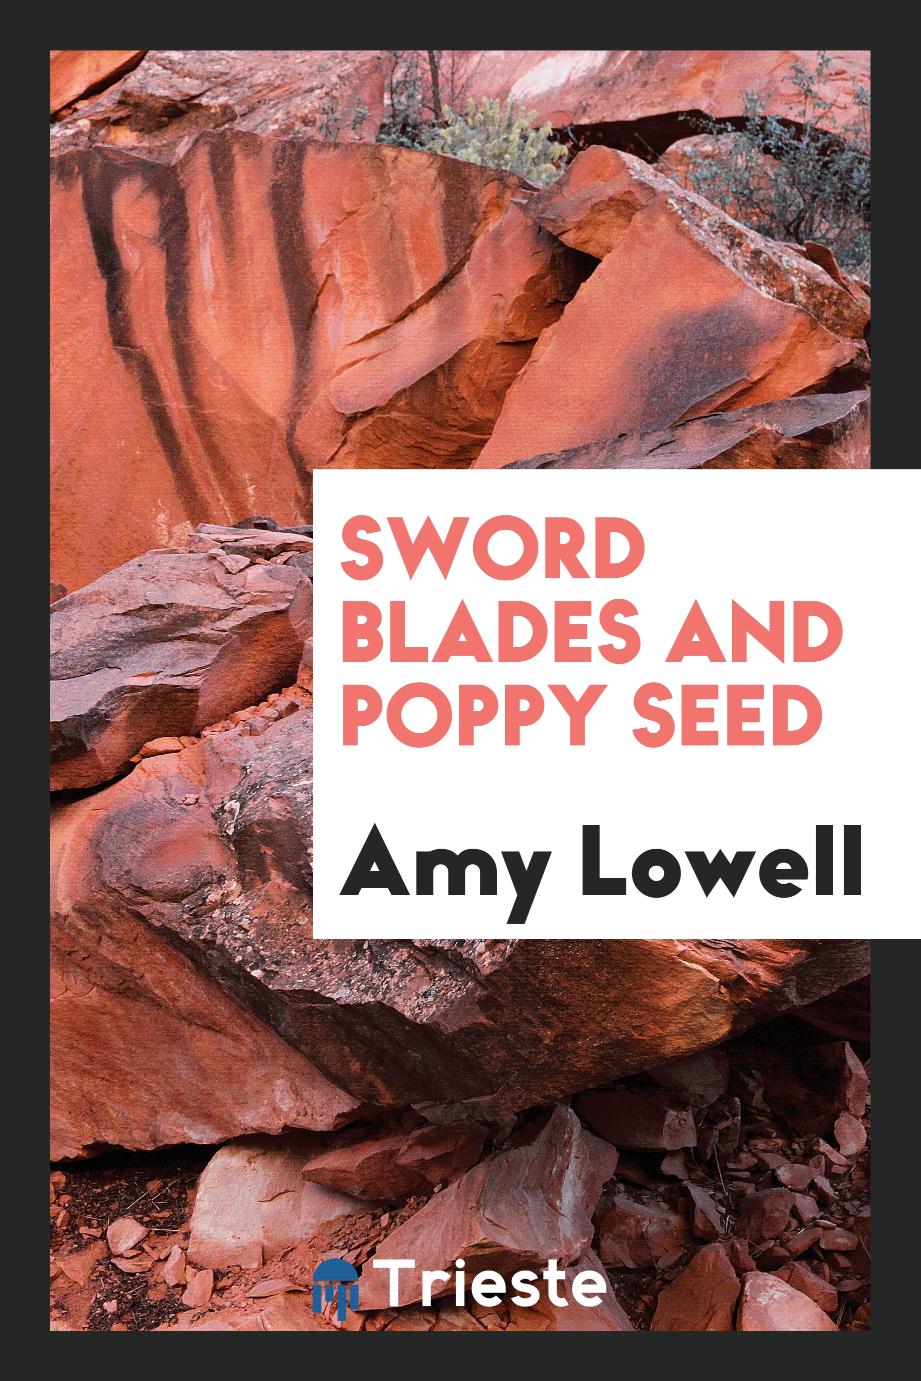 Sword blades and poppy seed